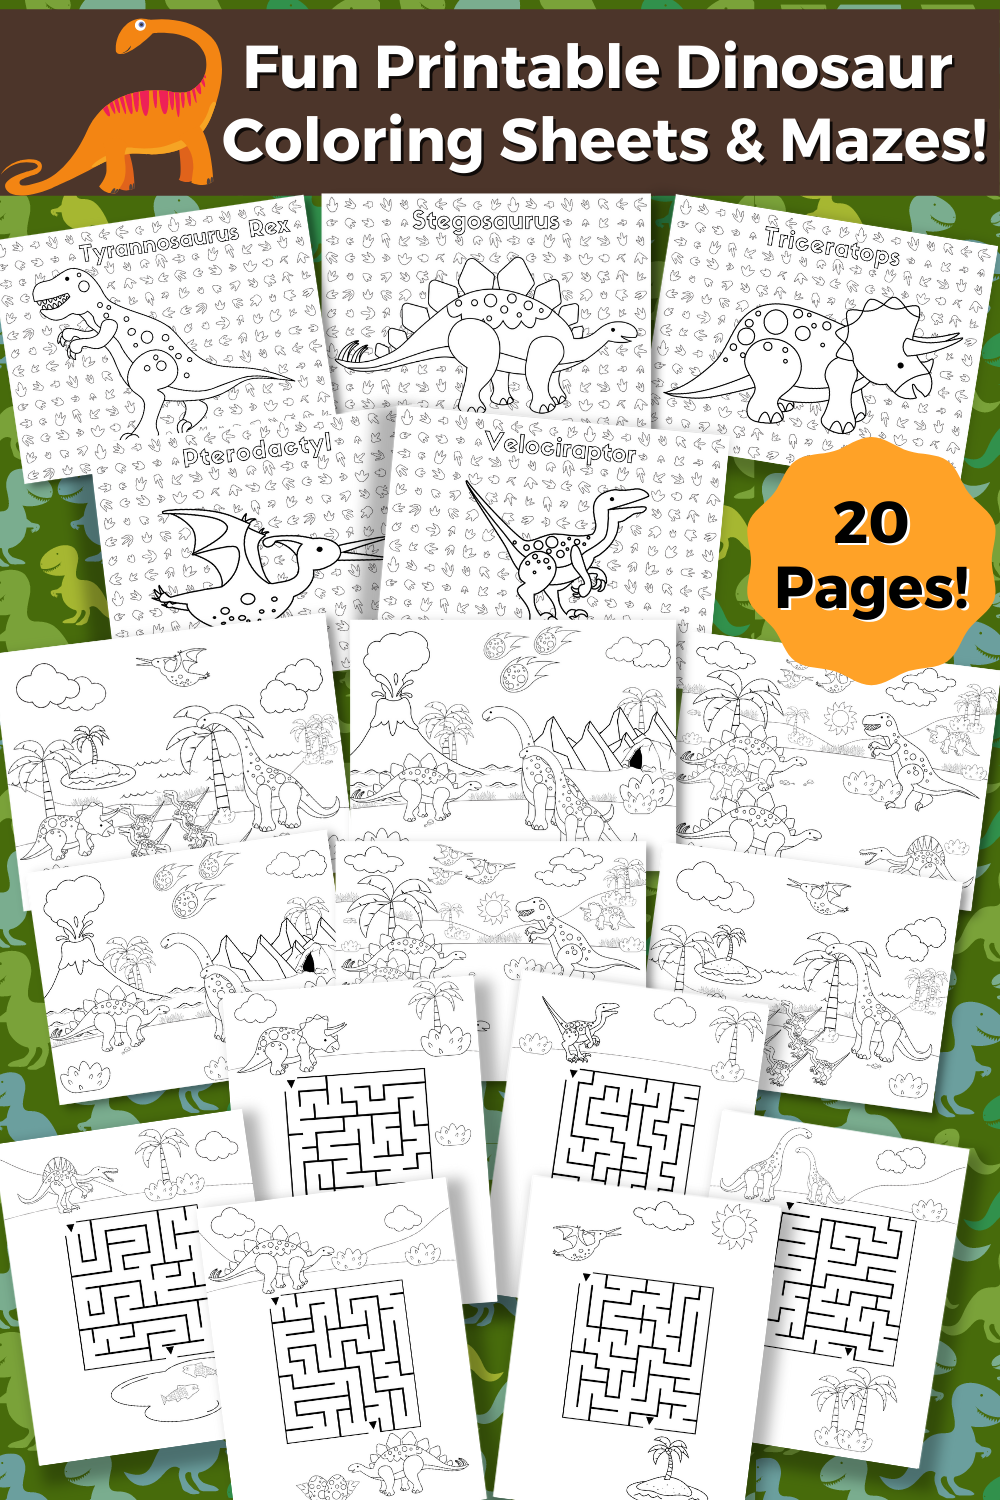 Shows a picture of some of the pages of the dinosaur coloring and activity sheets. States Fun Printable Dinosaur Coloring Sheets & Mazes- 20 pages!